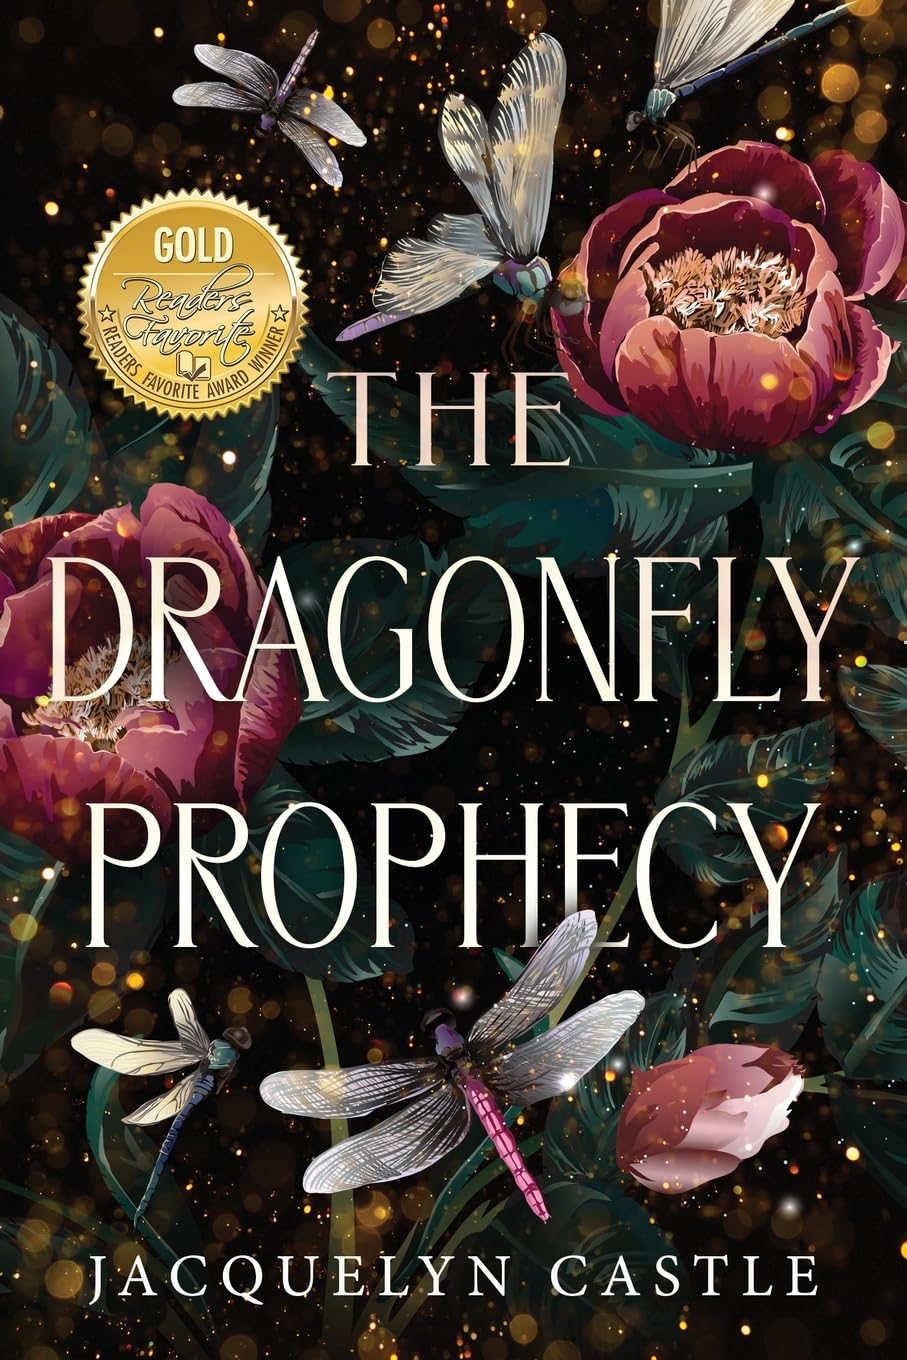 New novel "The Dragonfly Prophecy" by Jacquelyn Castle is released, a young adult fantasy about a young woman’s struggles with love, death, and coming to terms with destiny 